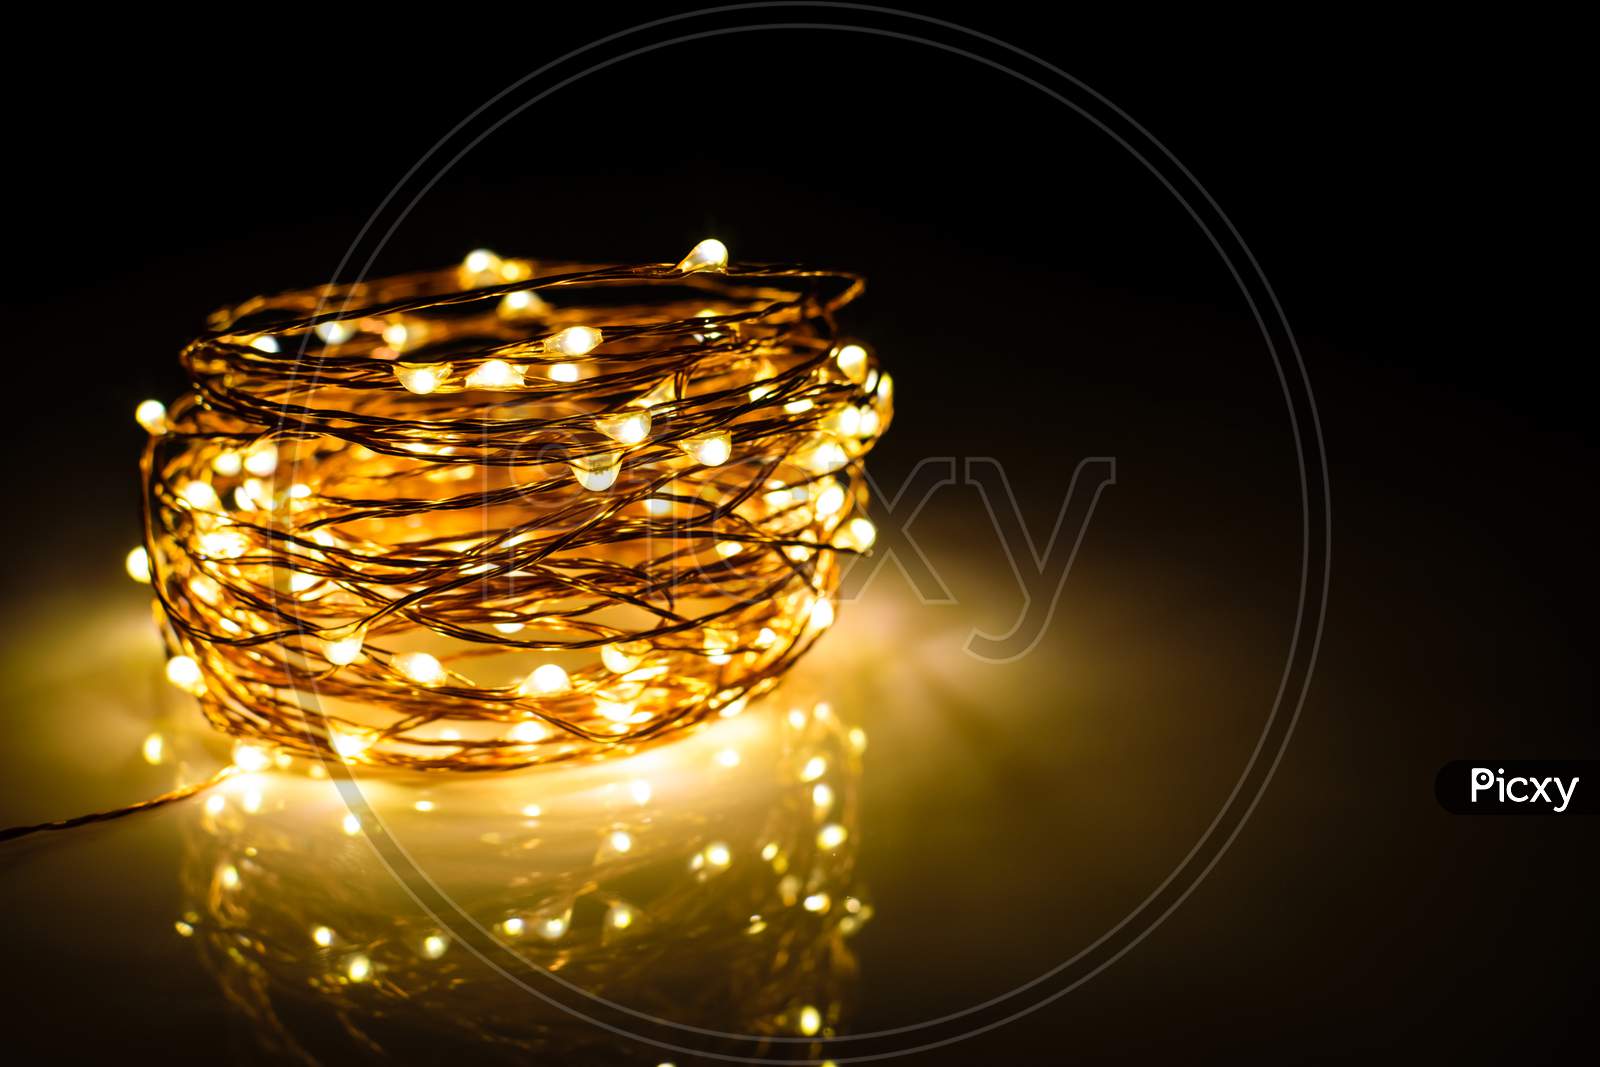 Yellow Colored Light Chain For Decoration Placed On A Reflective Surface